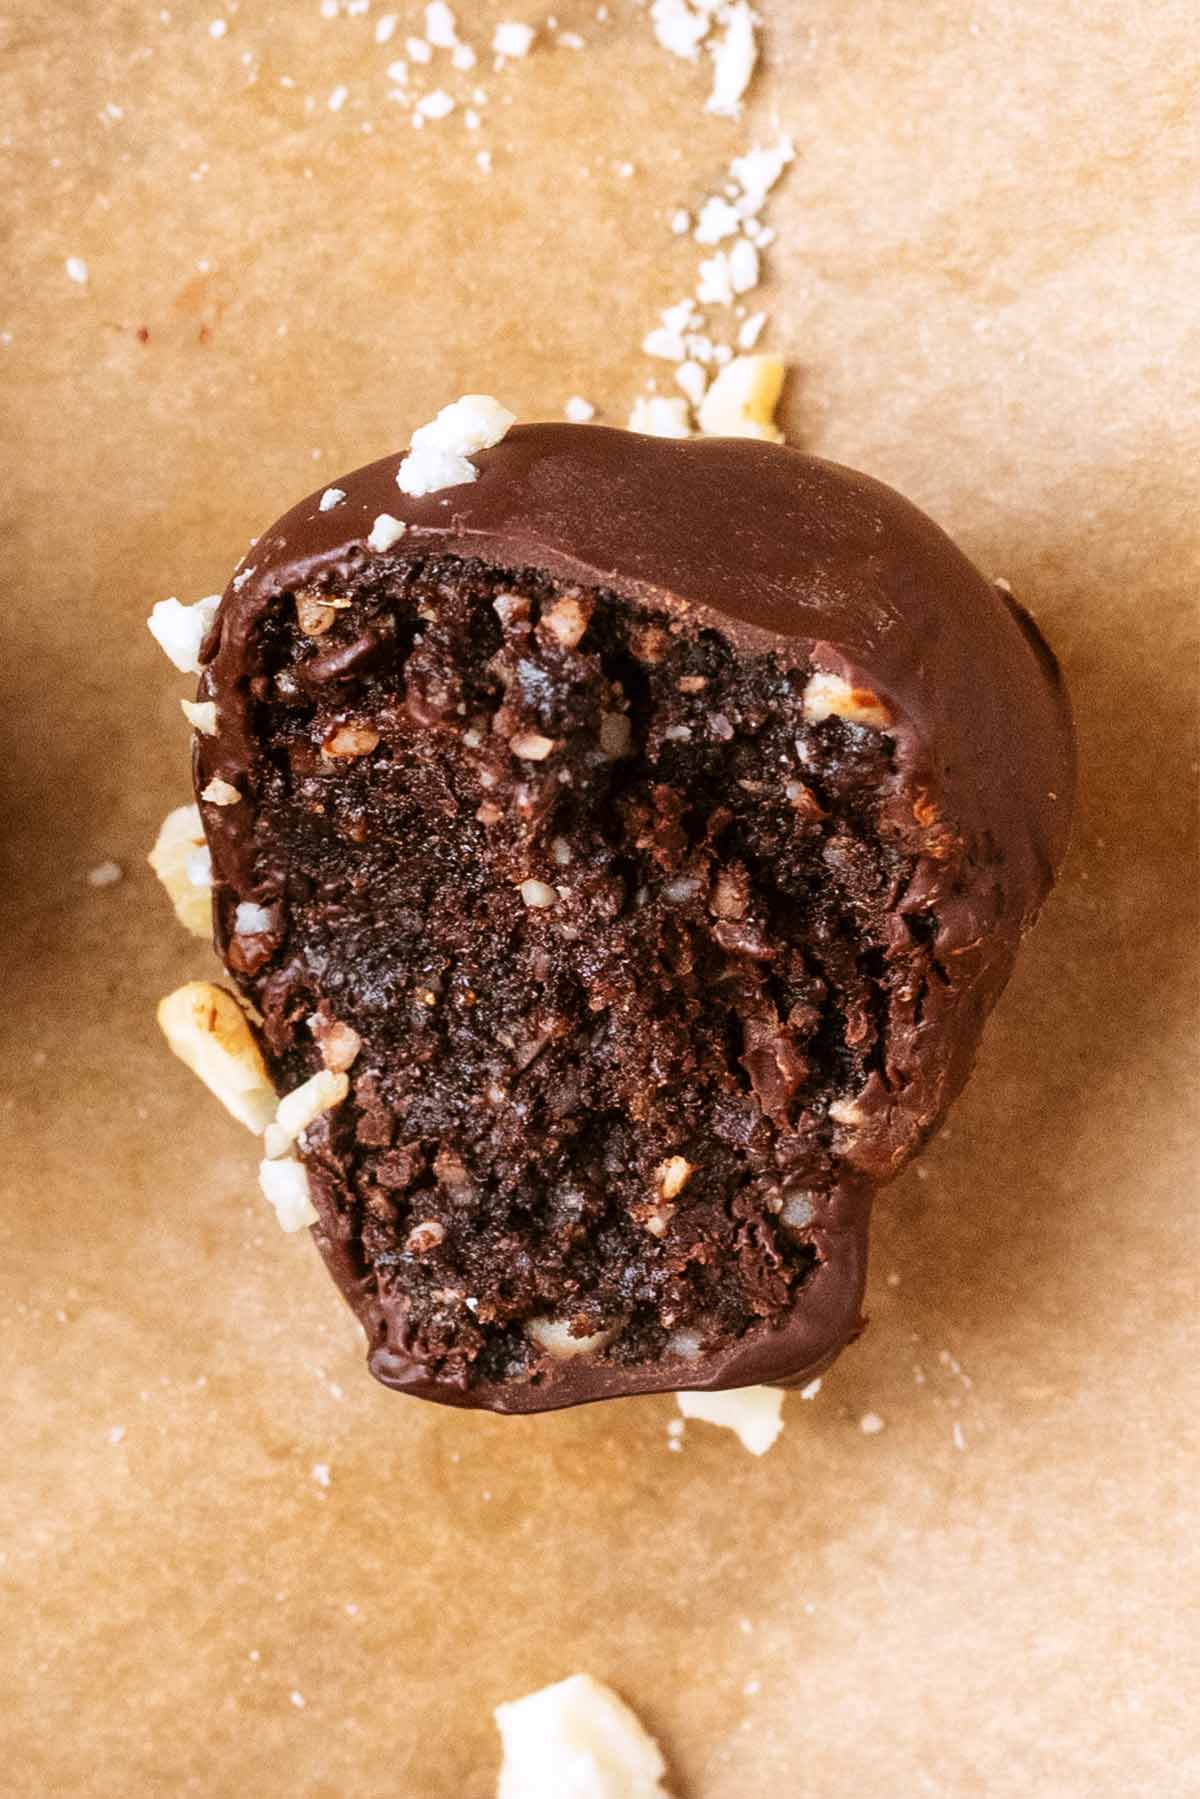 A chocolate covered brownie ball broken open to show the inside.